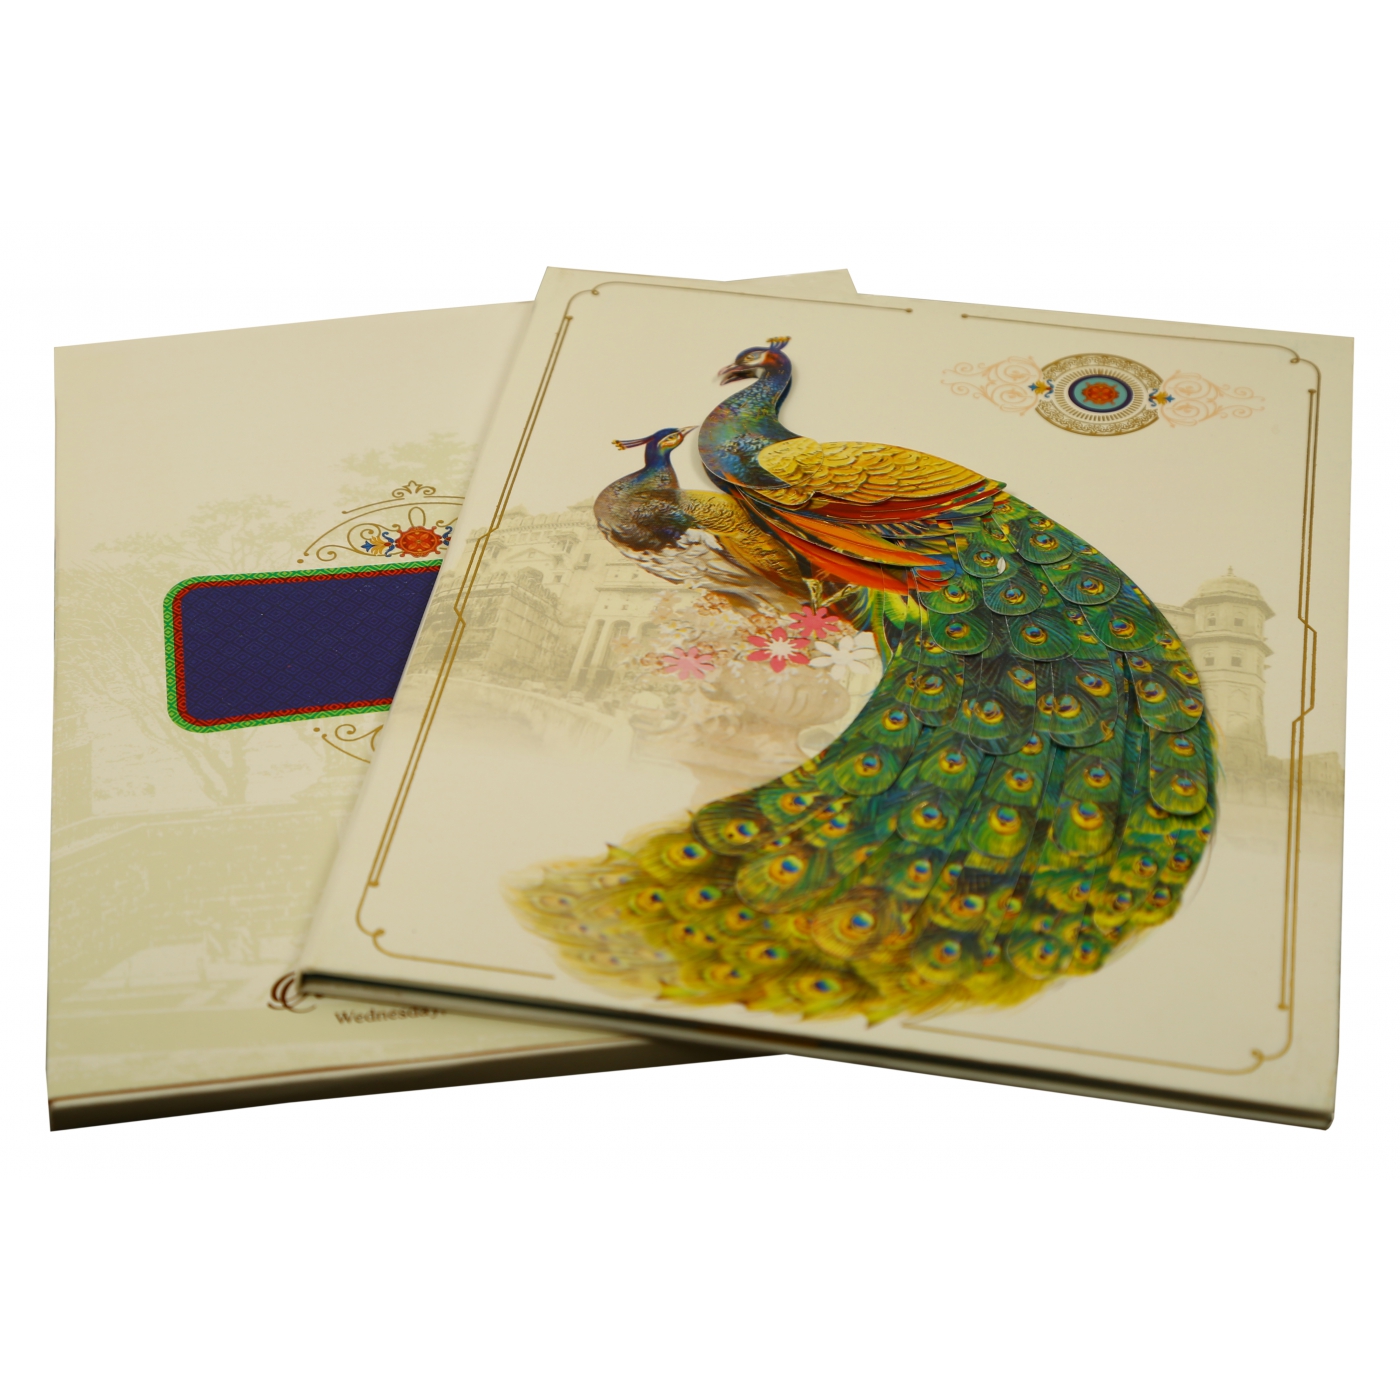 Holiday Photo Cards - Peacock Design & Paperie - Wedding